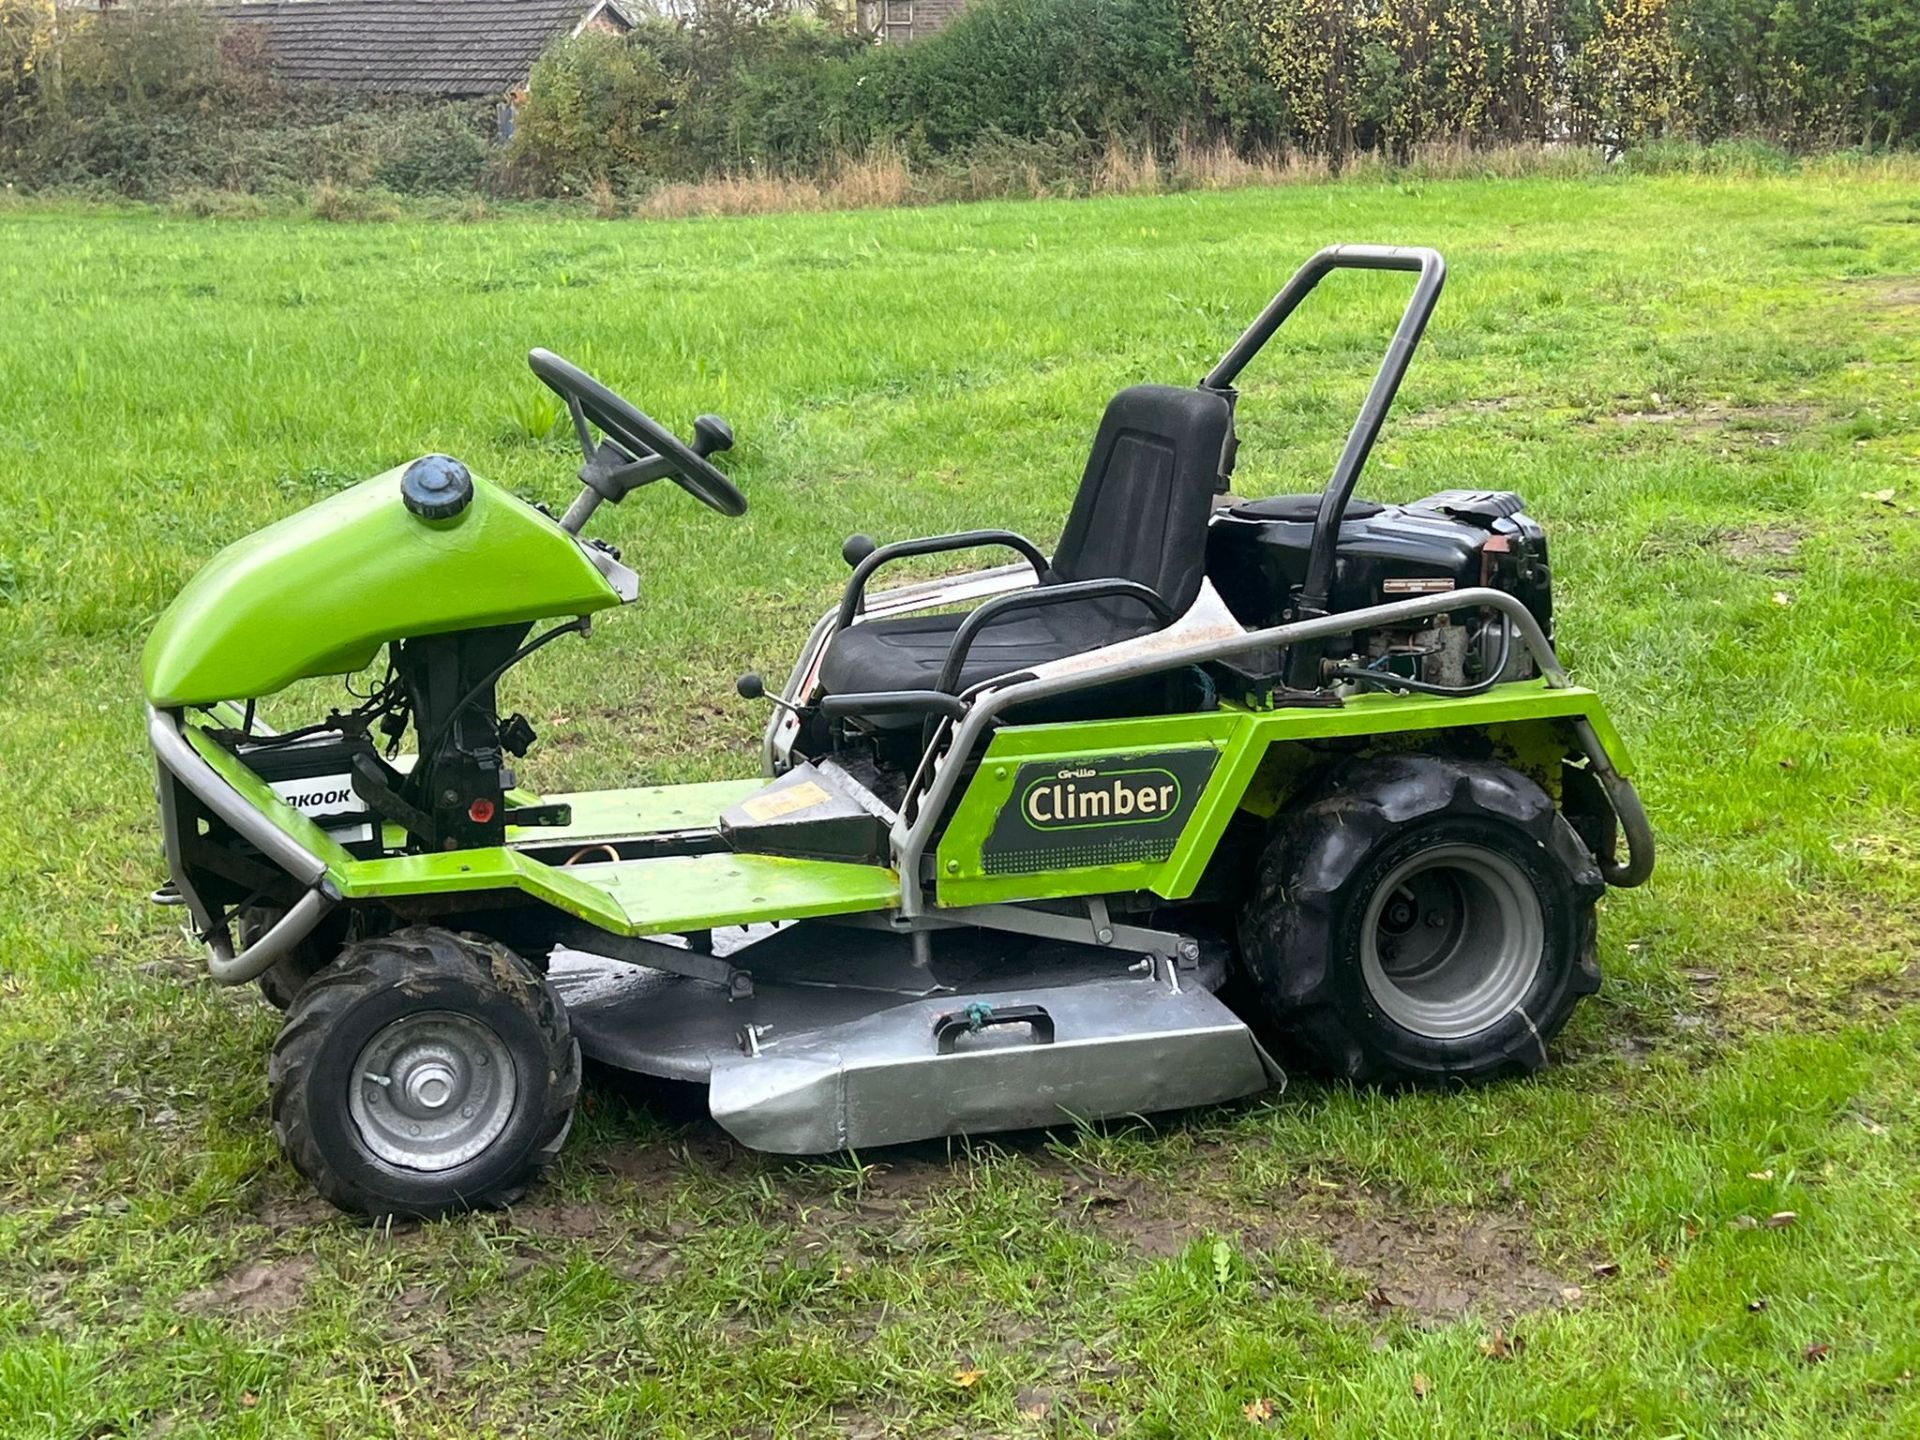 GRILLO CLIMBER 910 RIDE ON LAWN MOWER BANK MOWER - 18HP V TWIN BRIGGS AND STRATTON ENGINE *PLUS VAT* - Image 6 of 8